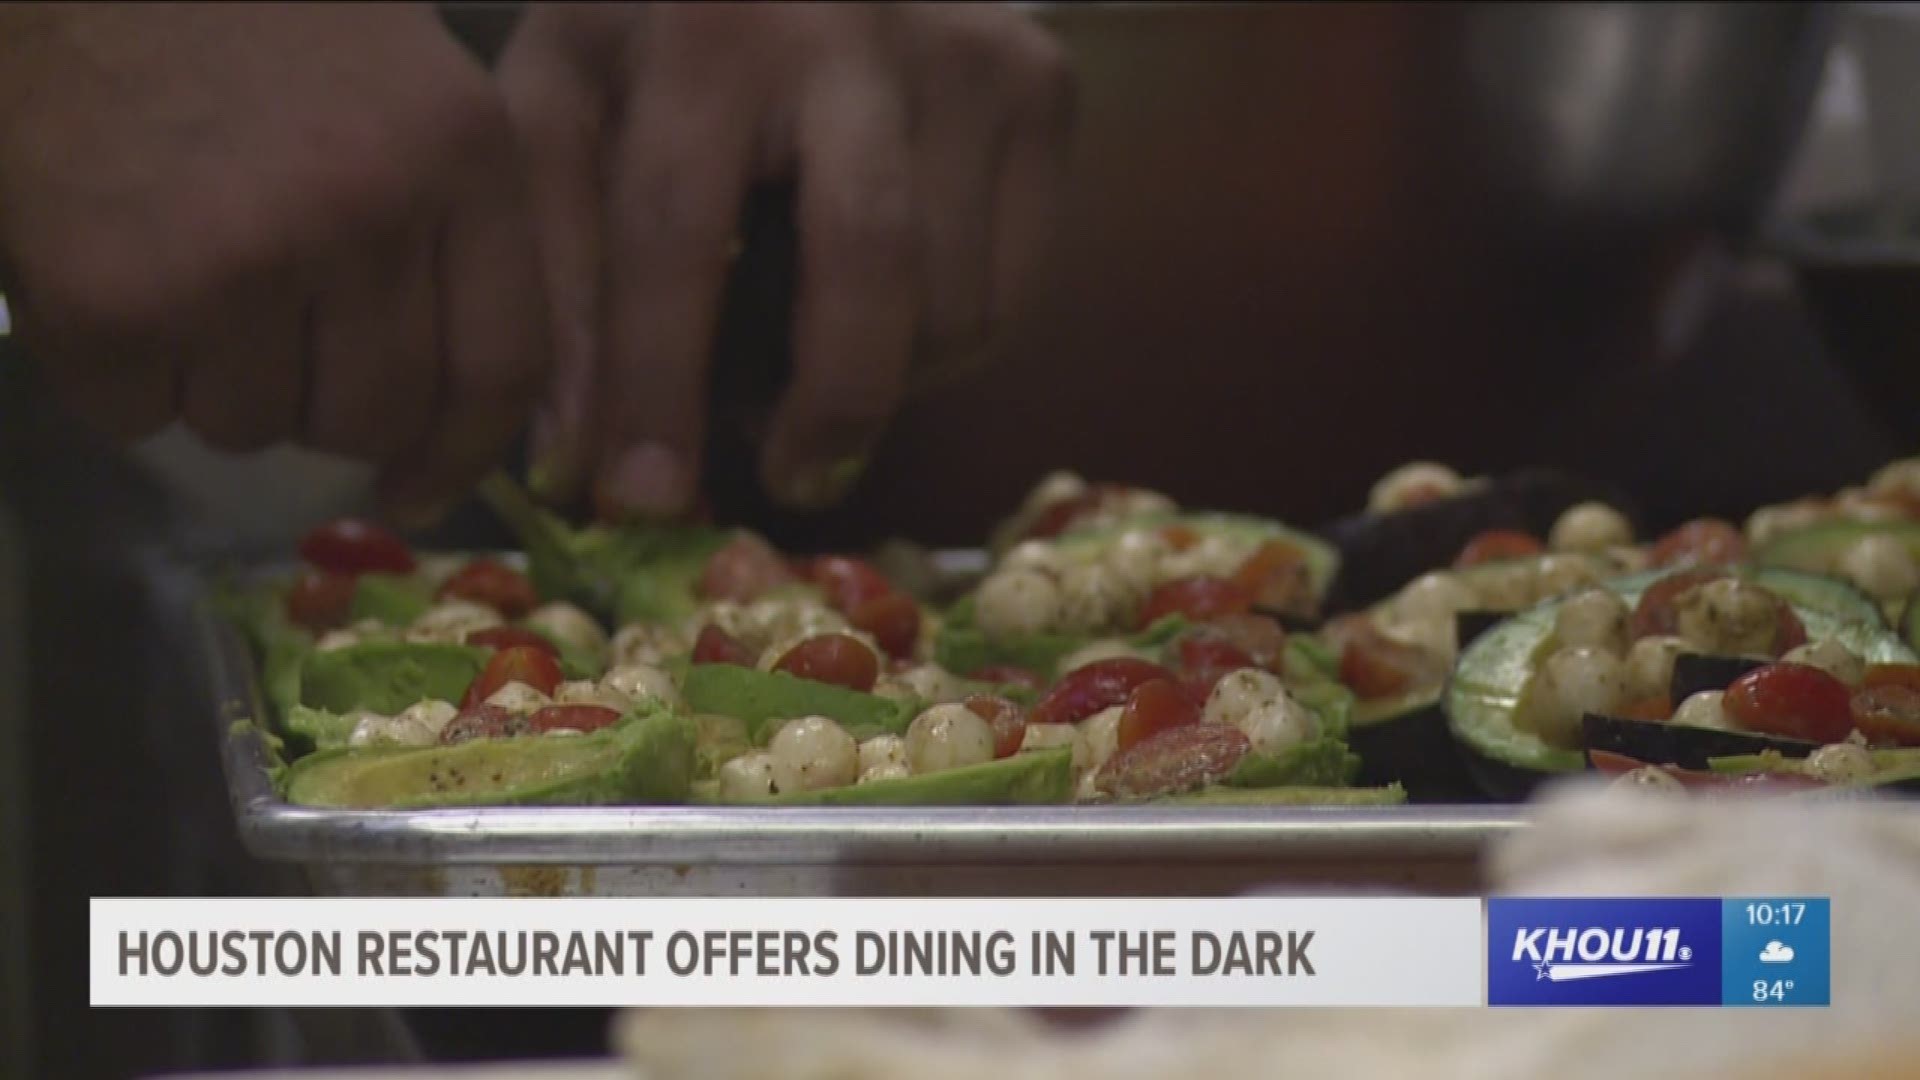 Lights are optional at one Houston restaurant, as customers experience food in ways that spark their other senses. Just over two dozen people signed on for the meal at Henderson Heights Pub, knowing their senses would be put to the test Monday.